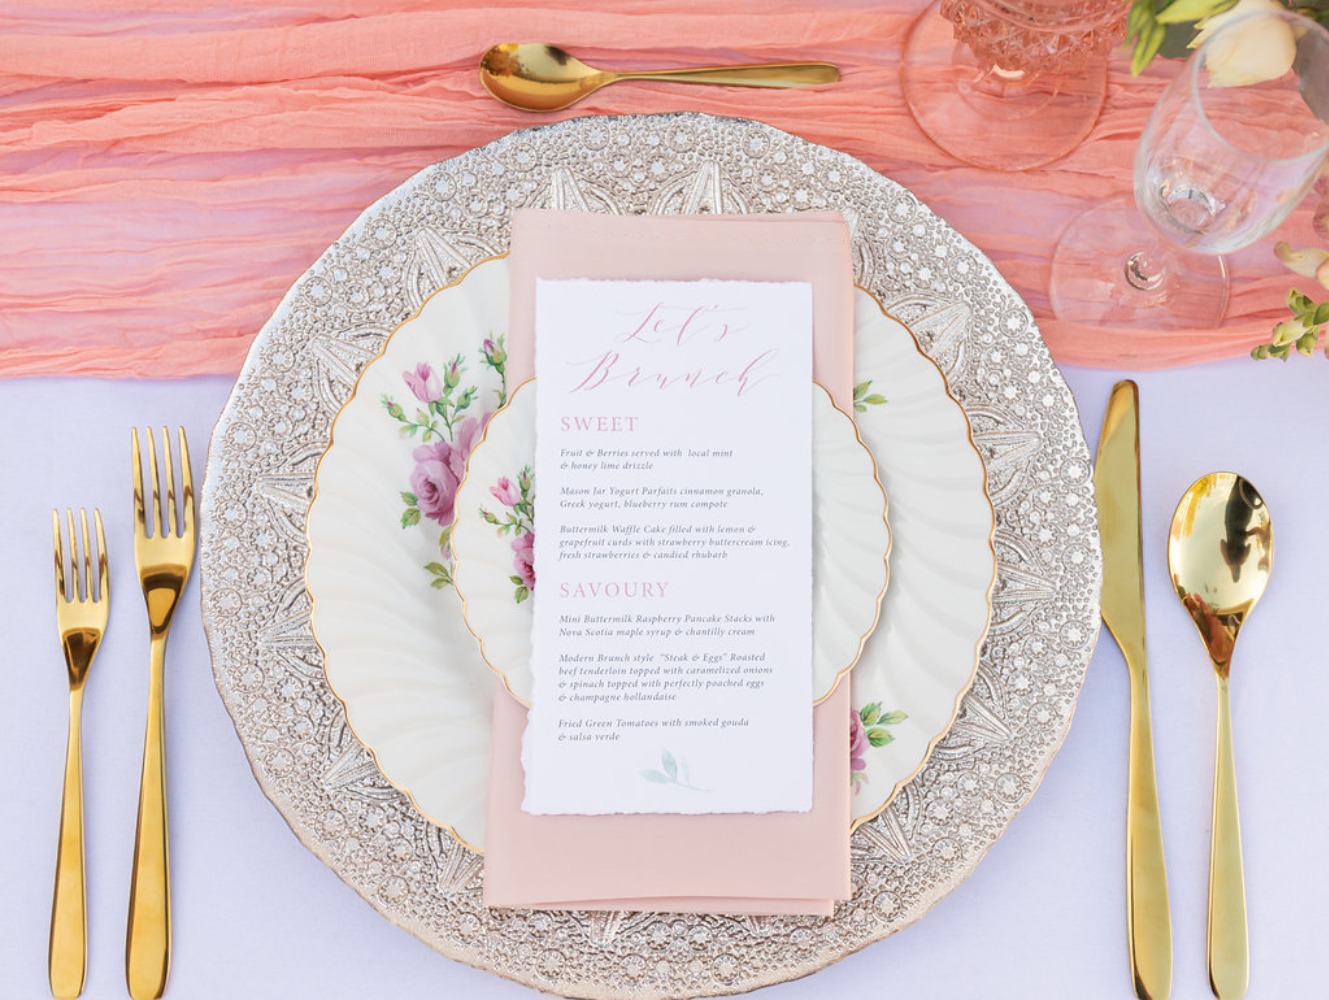 Blush and gold place setting